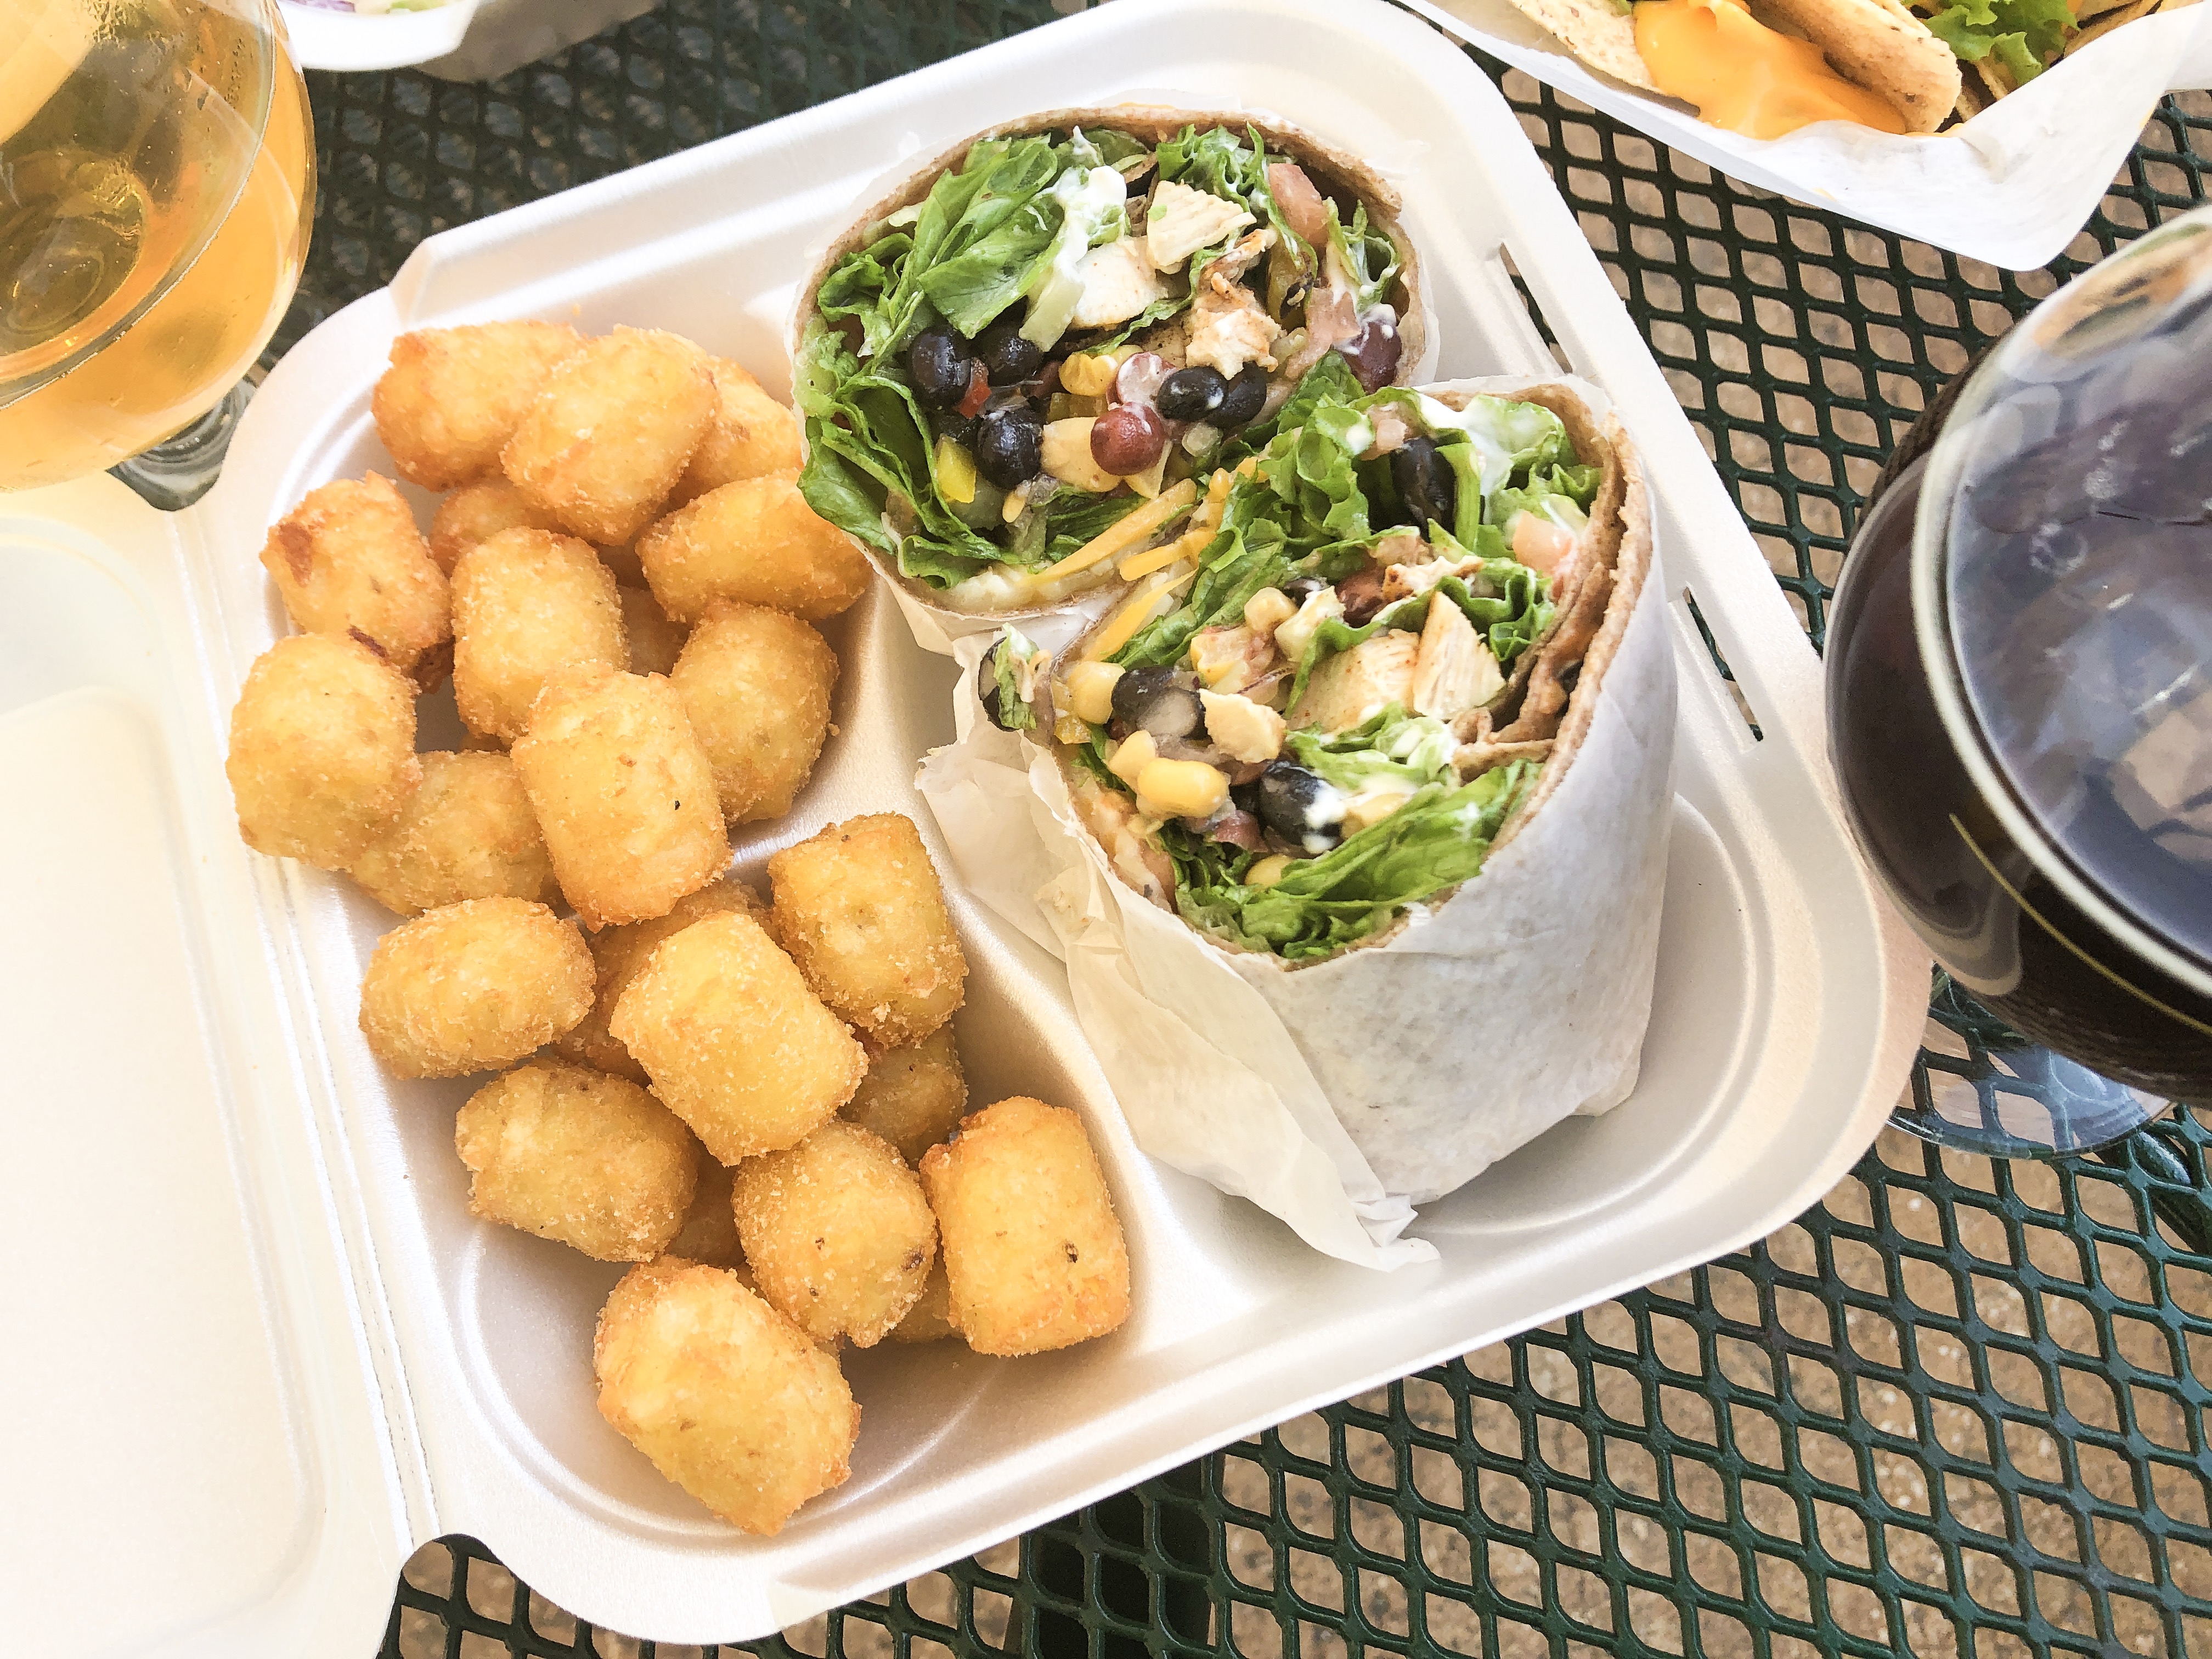 The Southwest Wrap with Tater Tots